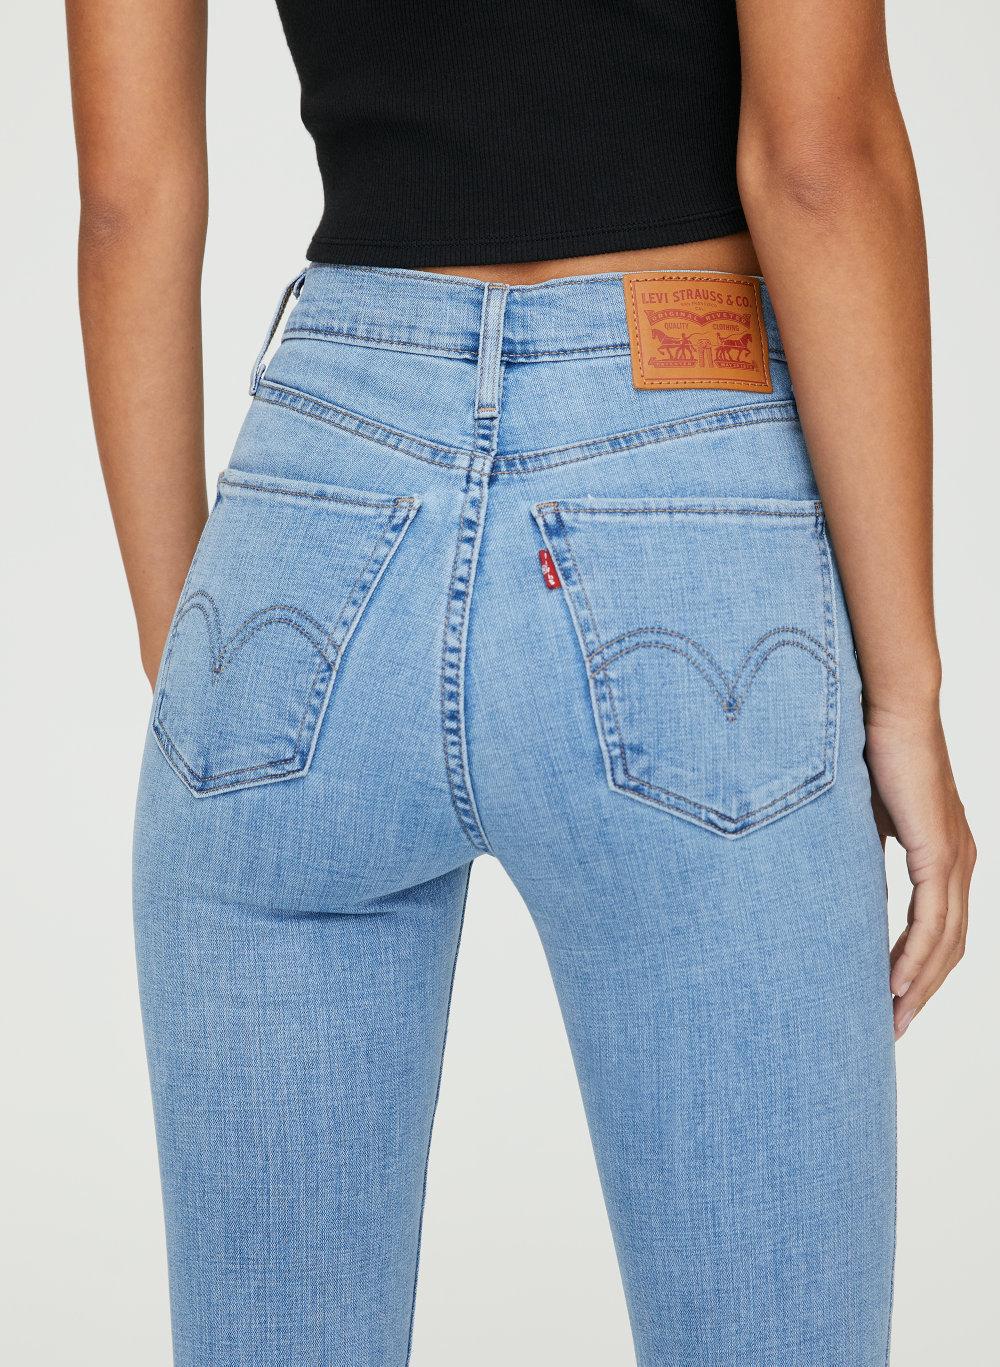 levis high waisted jeans canada